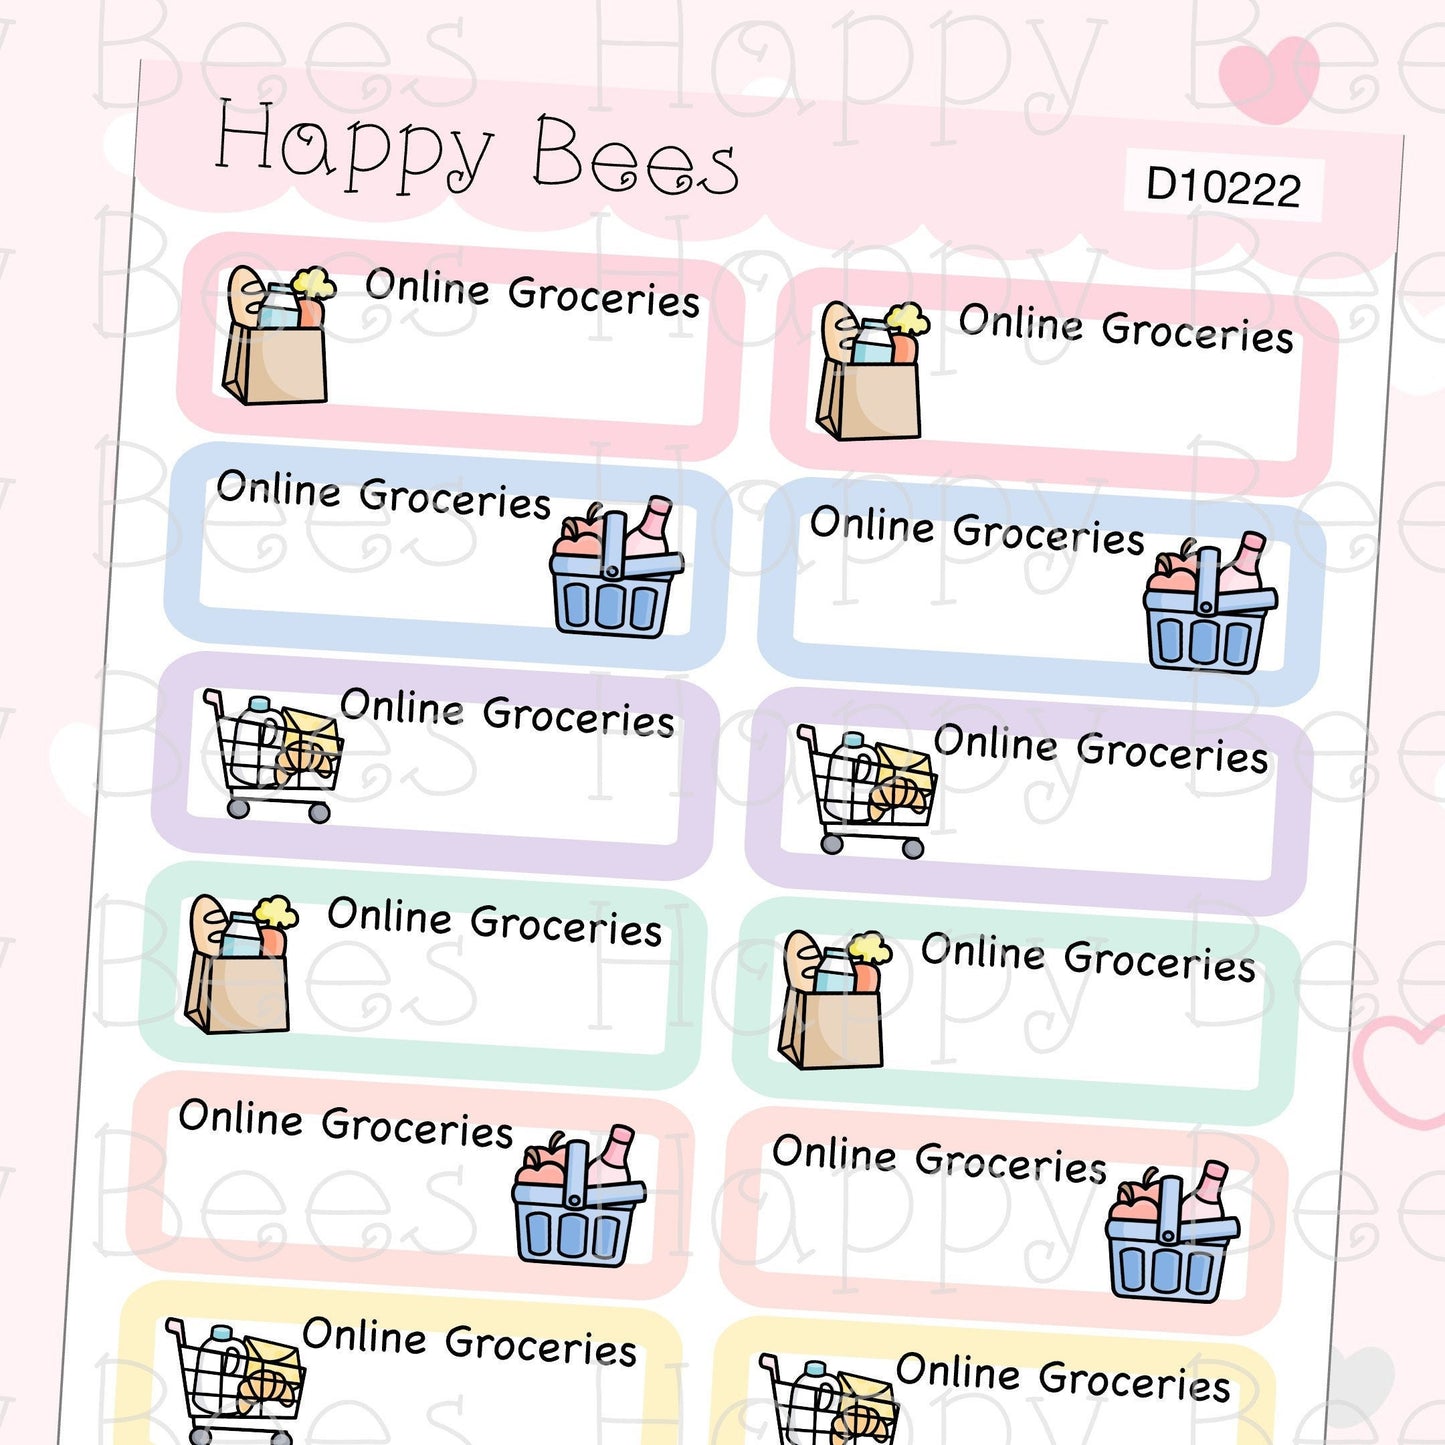 Online Groceries Tracker Boxes - Cute Doodles Shopping Planner Stickers D10222